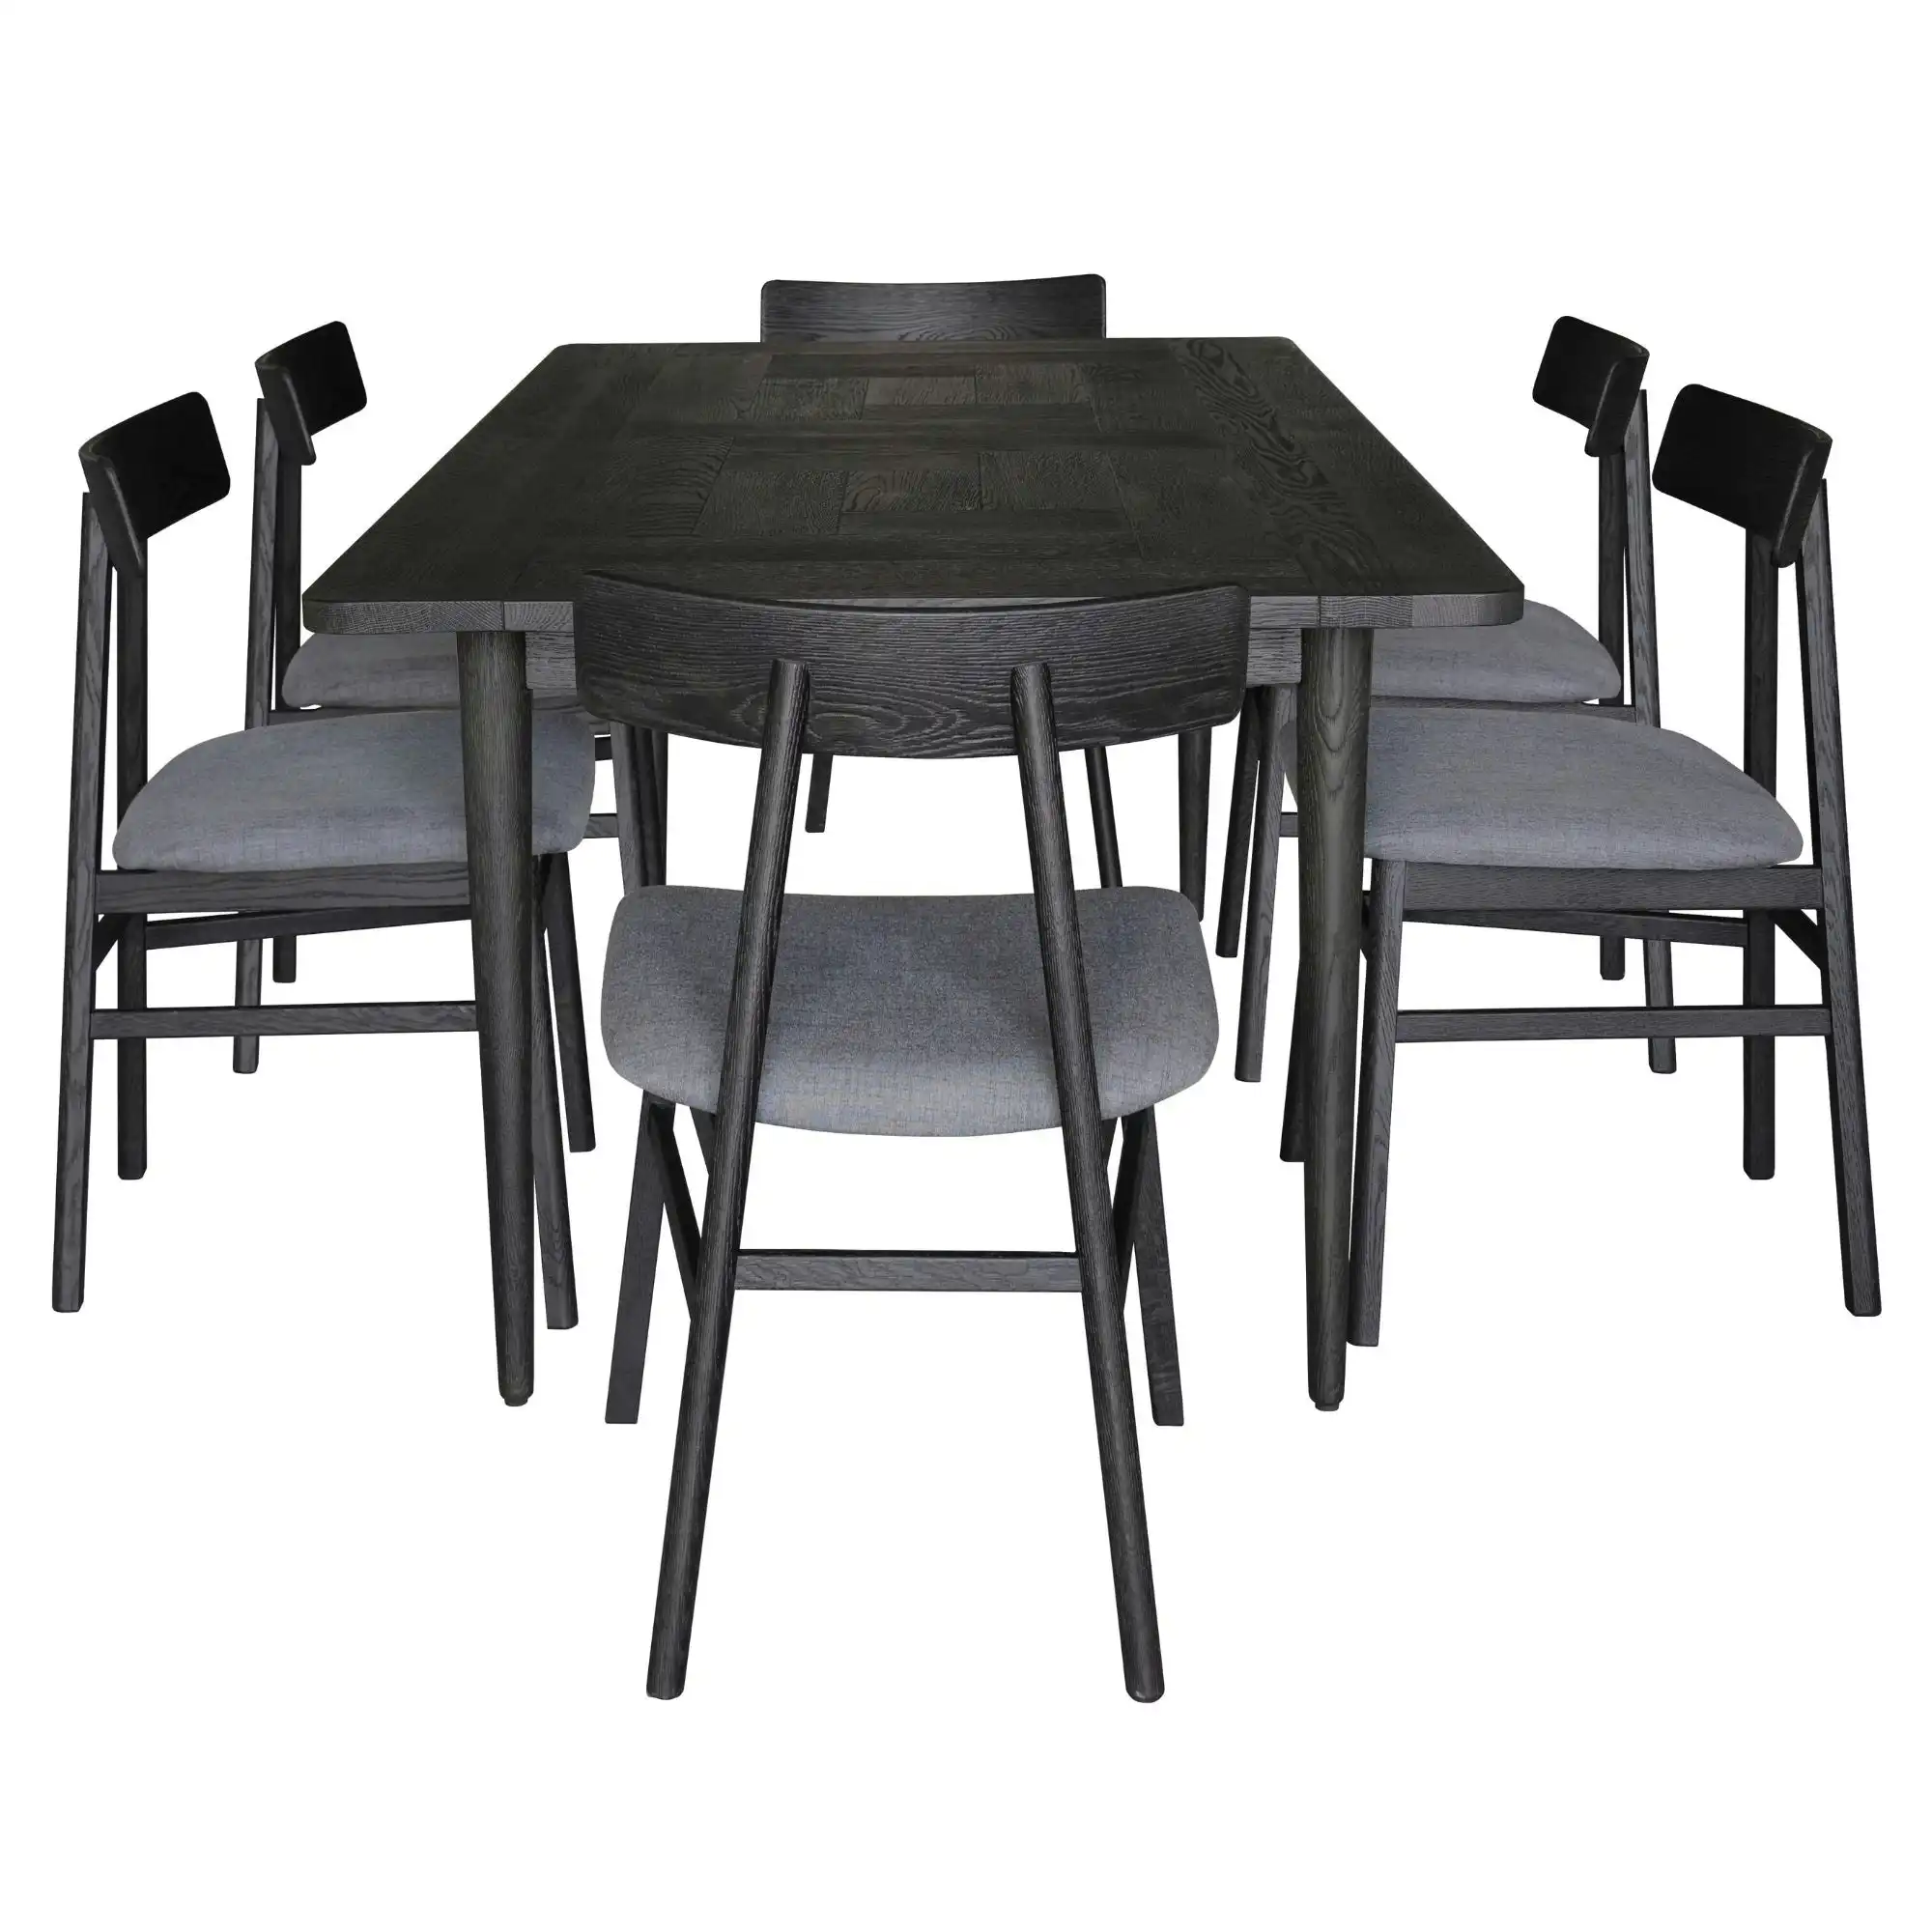 Claire 7pc Dining Table Fabric Seat Chair Set